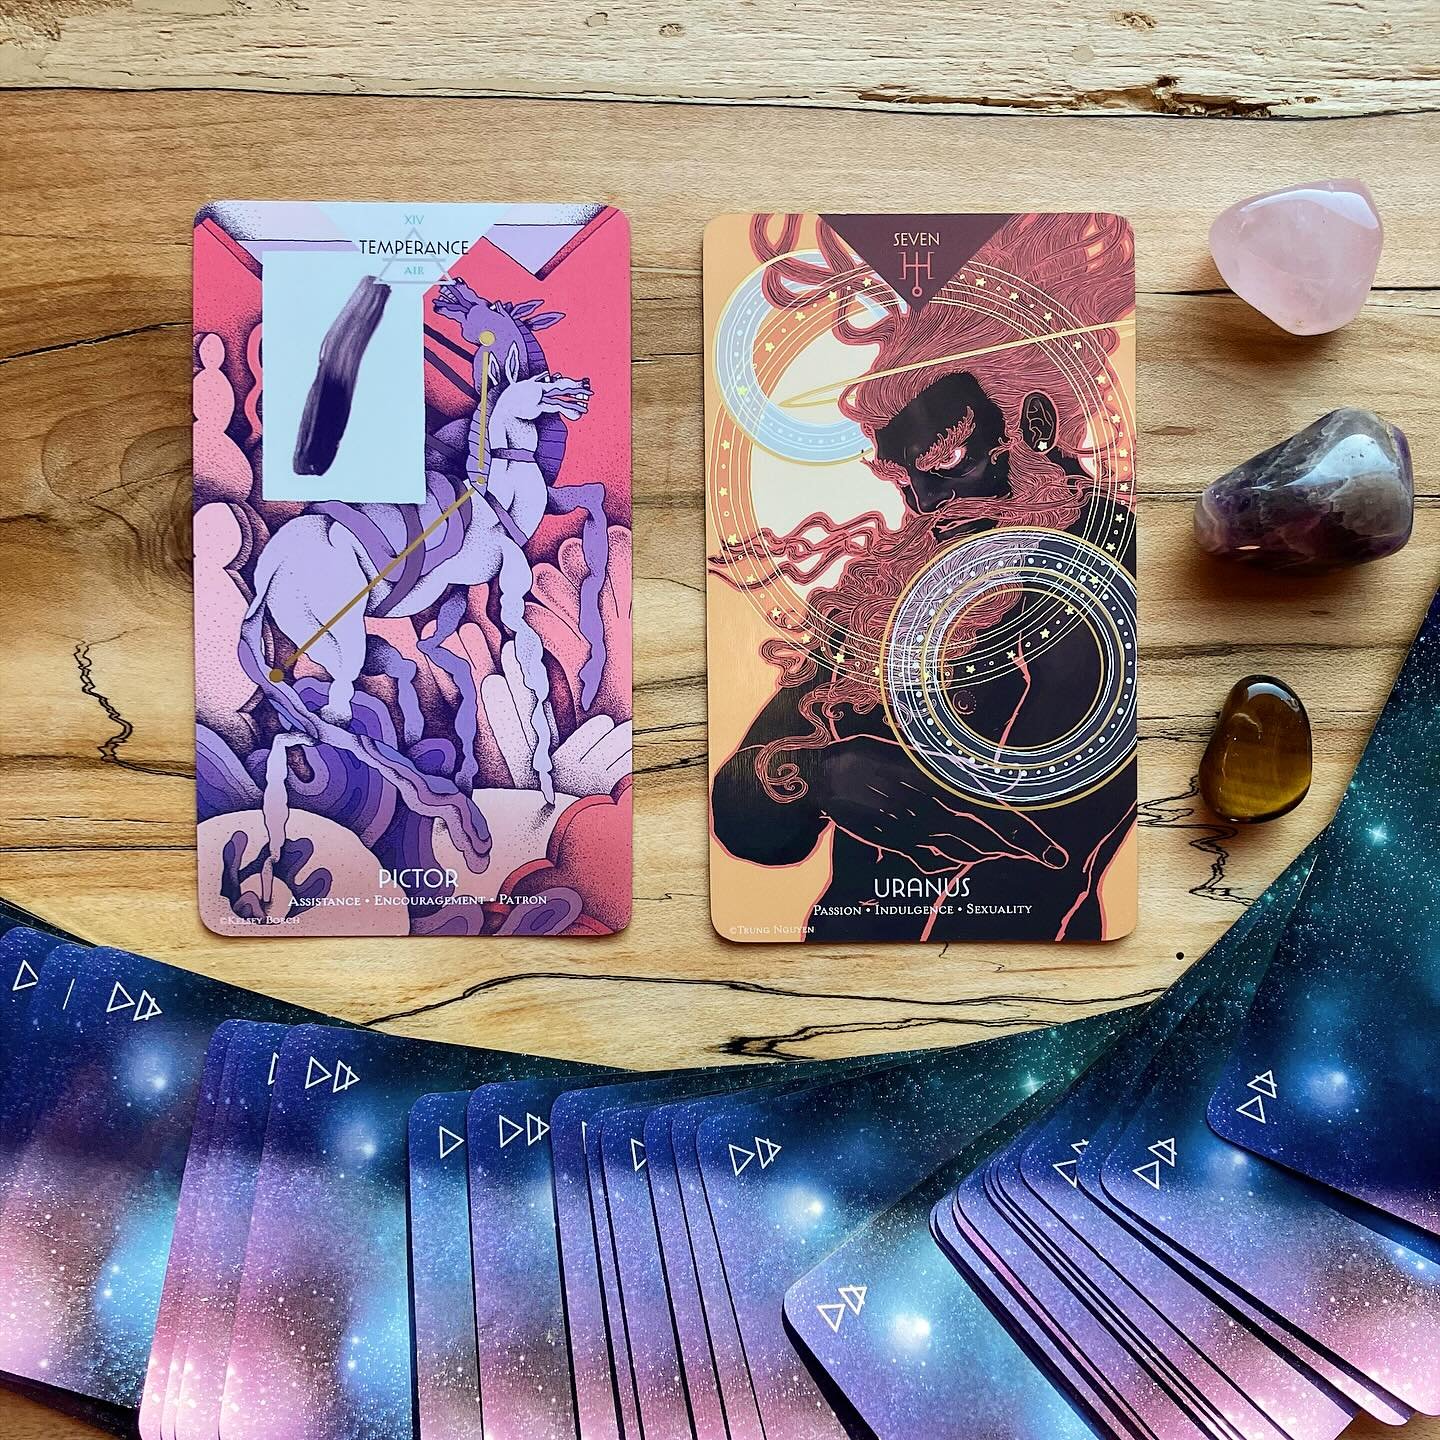 Ha! These silly horsies are getting a very stern look from an angry man. I find that in this deck, the Cosmos Tarot and Oracle deck, the card interpretations are non traditional so I can just make up whatever intuitively comes to me without precedent